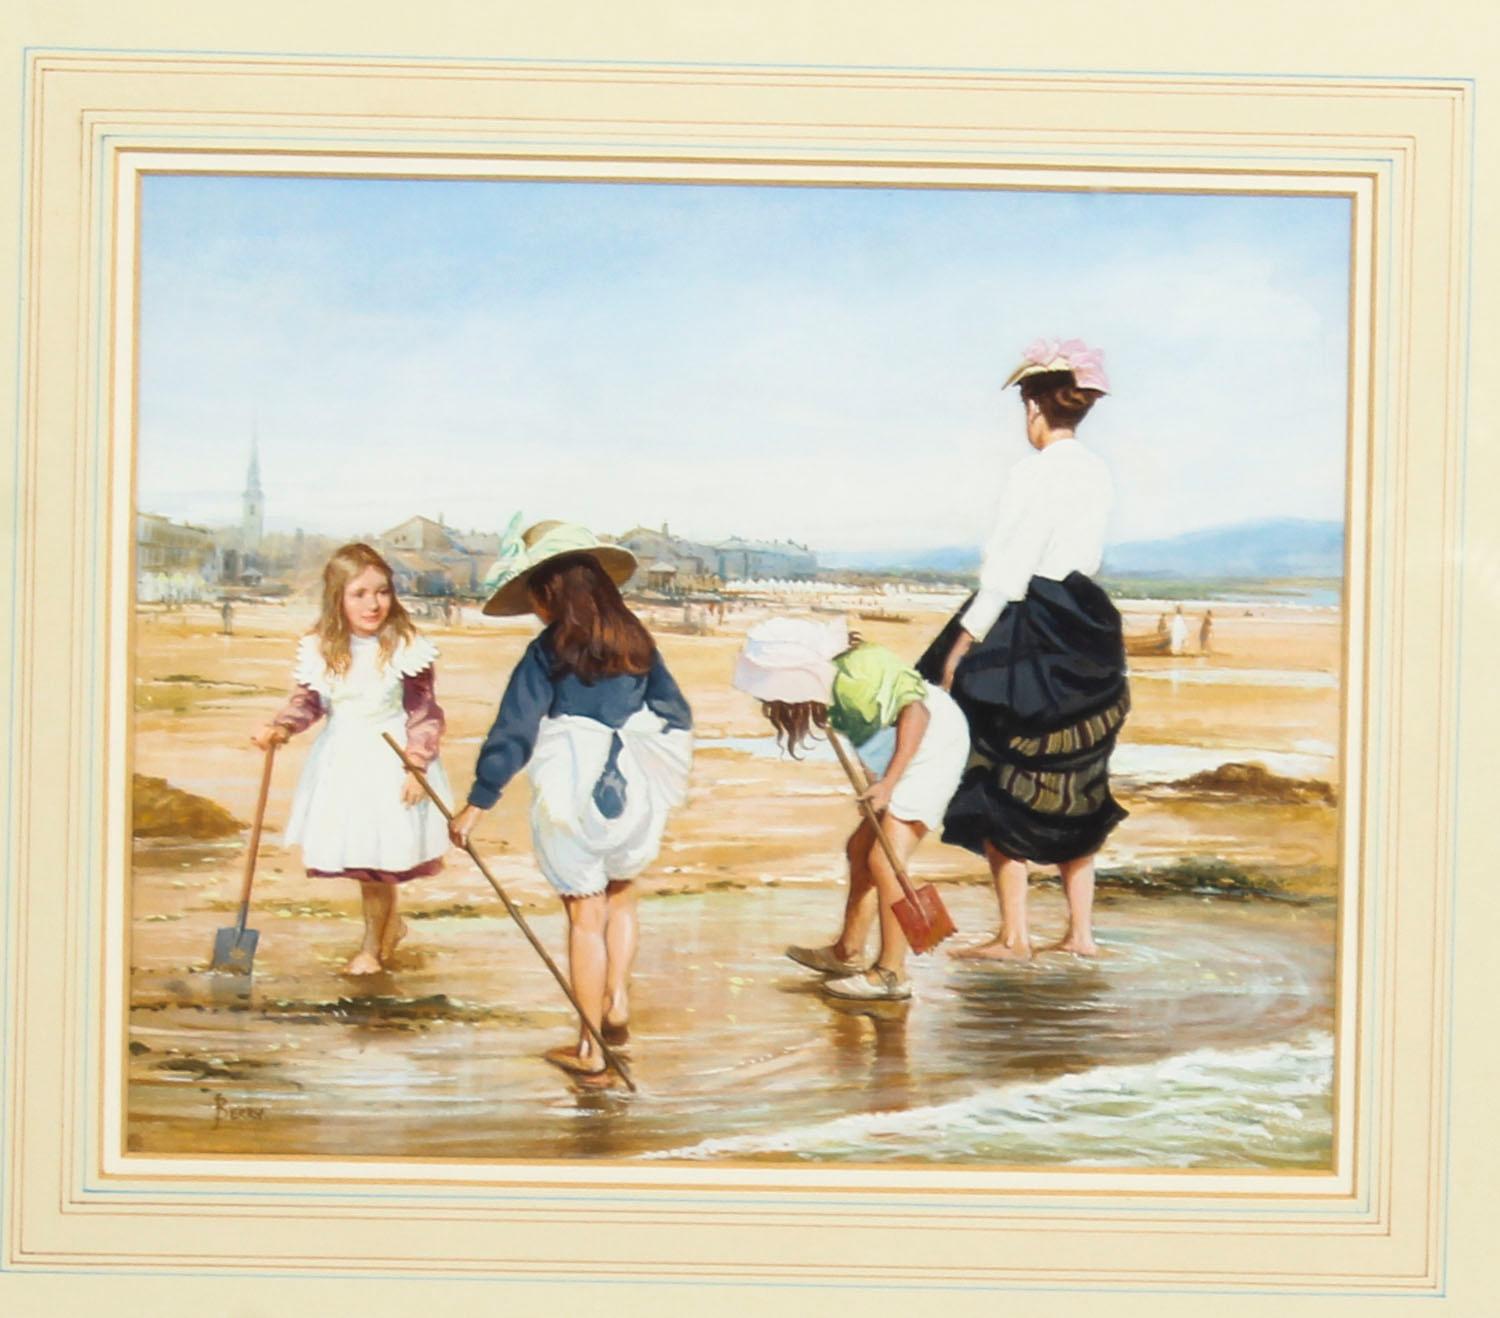 This is a beautiful watercolor by the renowned artist John Berry entitled 'At the seaside' mid-20th century in date.

The painting depicts a very picturesque scene of three girls and their mother playing on the shore, with a view of an English